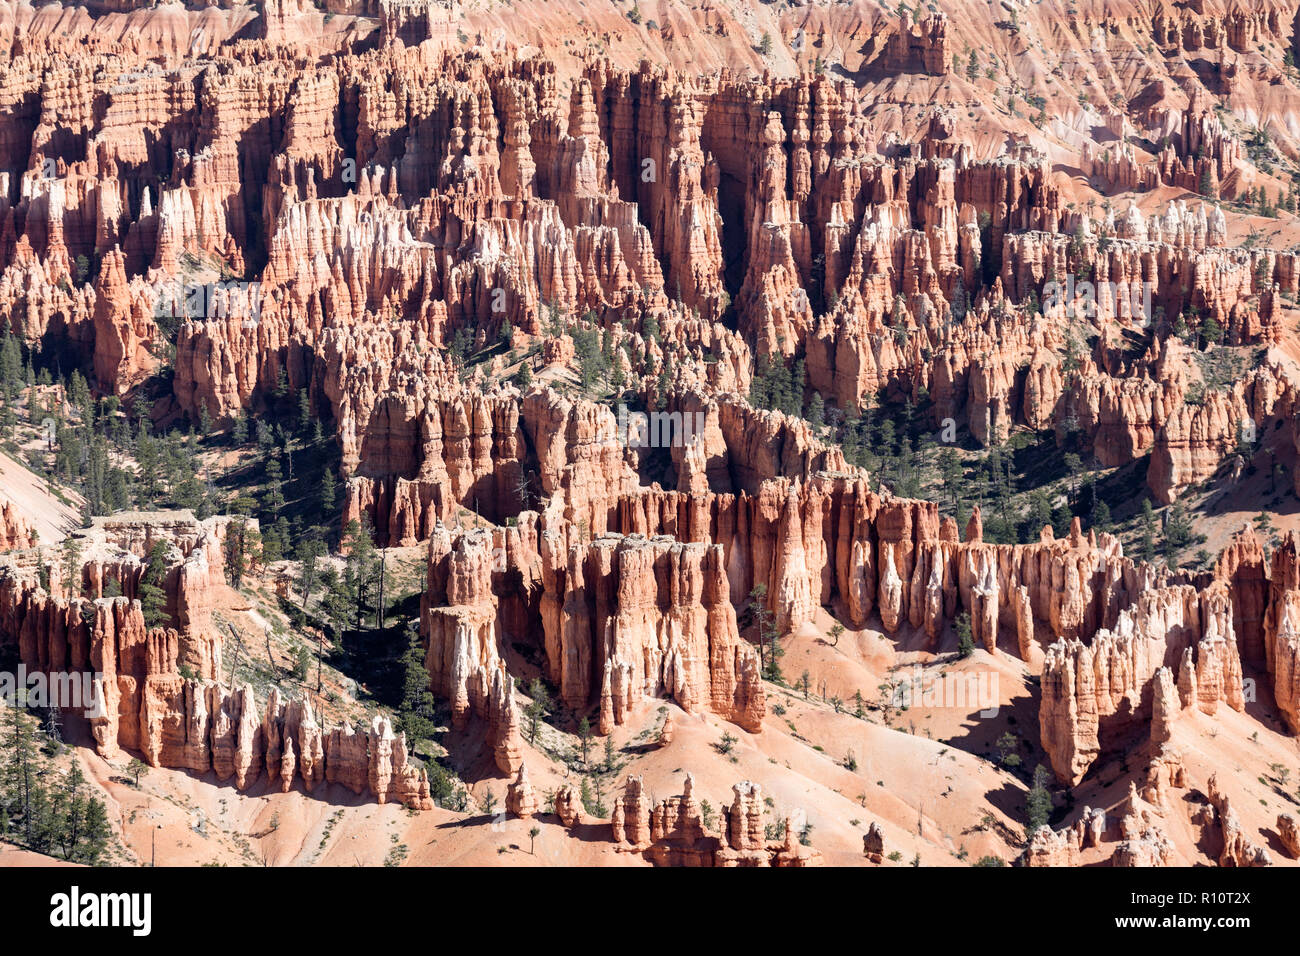 View of hoodoo formations in the Amphitheater in Bryce Canyon National Park, Utah, USA. Stock Photo